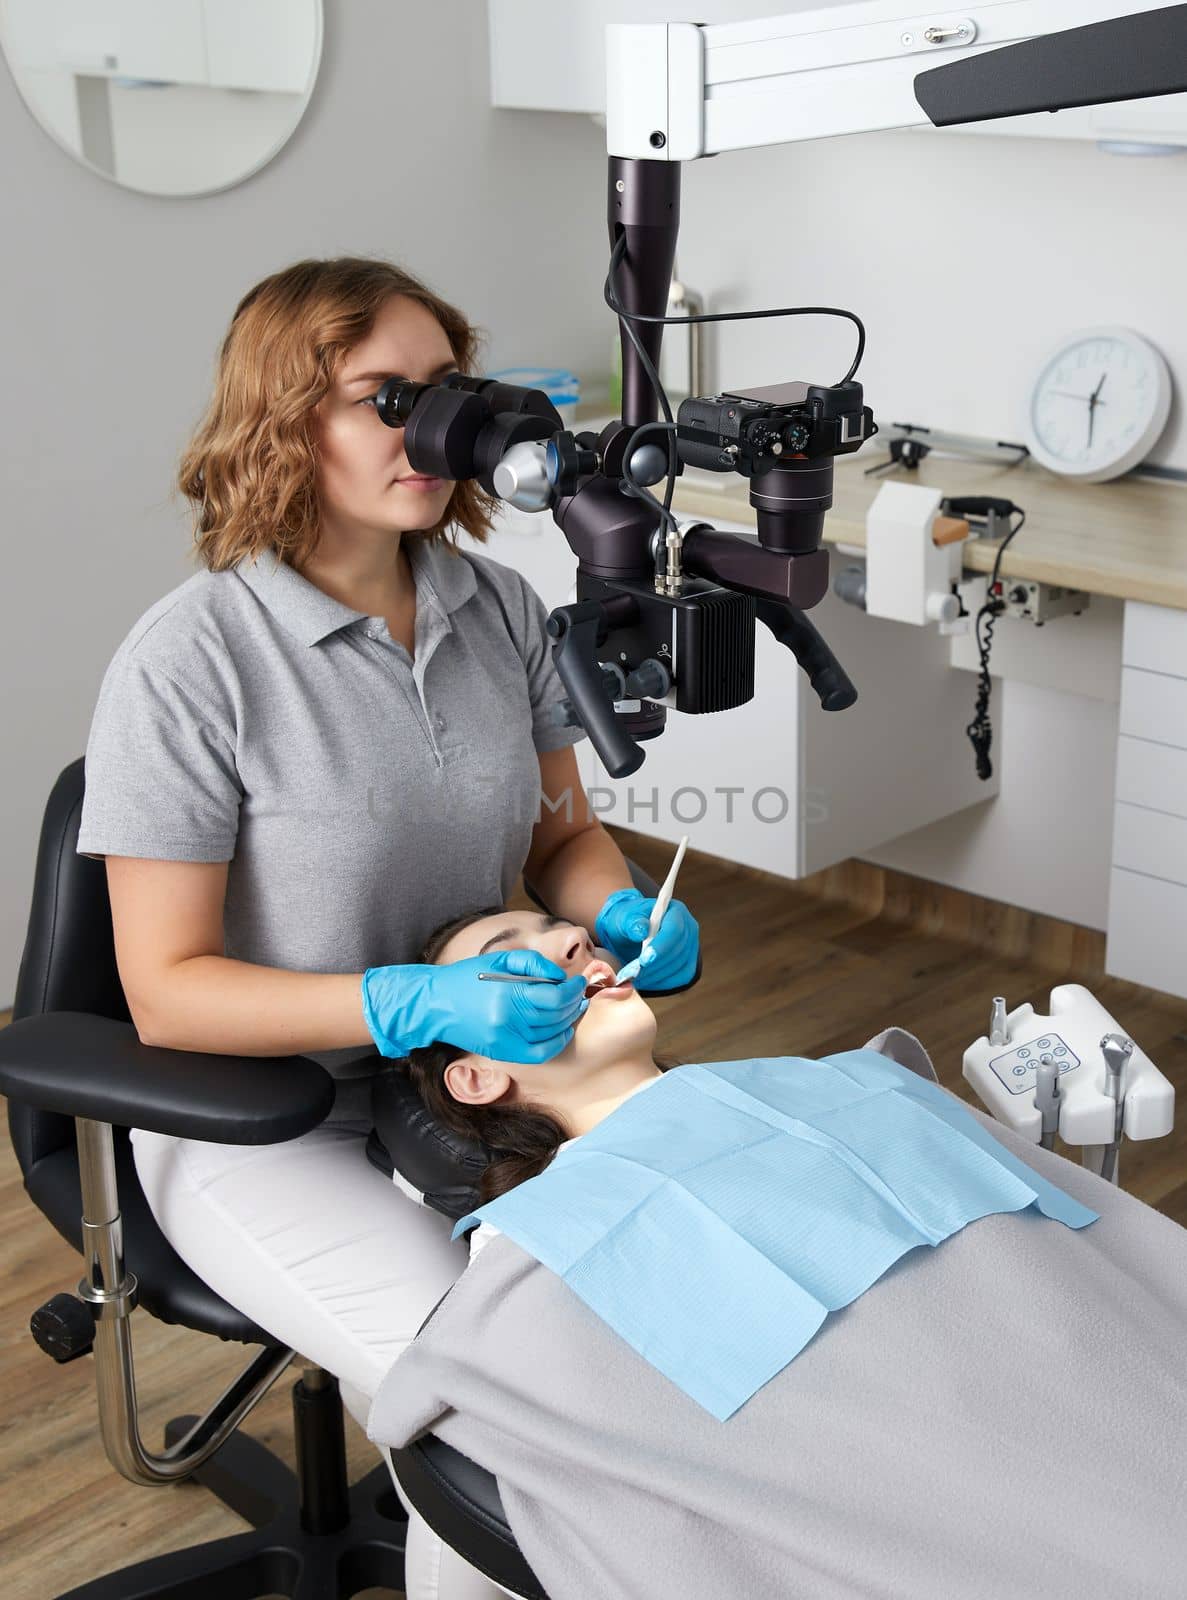 Female dentist with dental tools and microscope treating patient teeth at dental clinic office. Medicine, dentistry and health care concept. Dental equipment